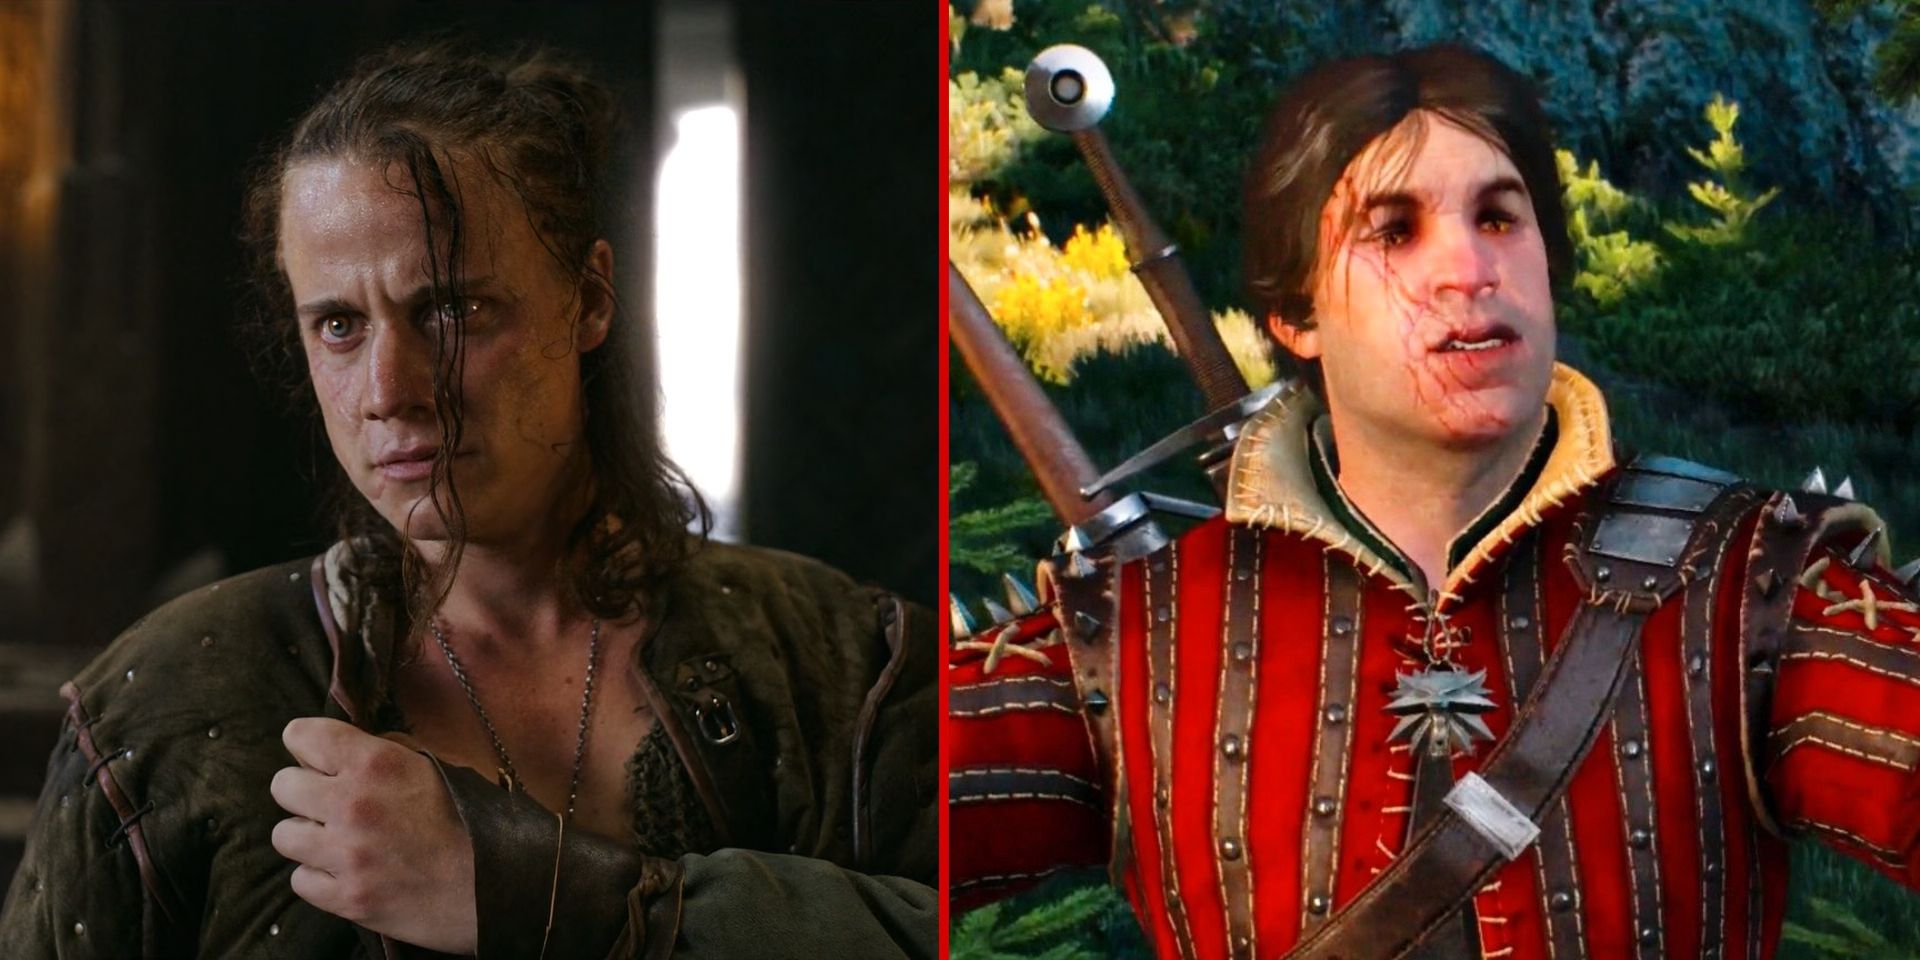 witcher-character-compare-game-netflix-show-eskel